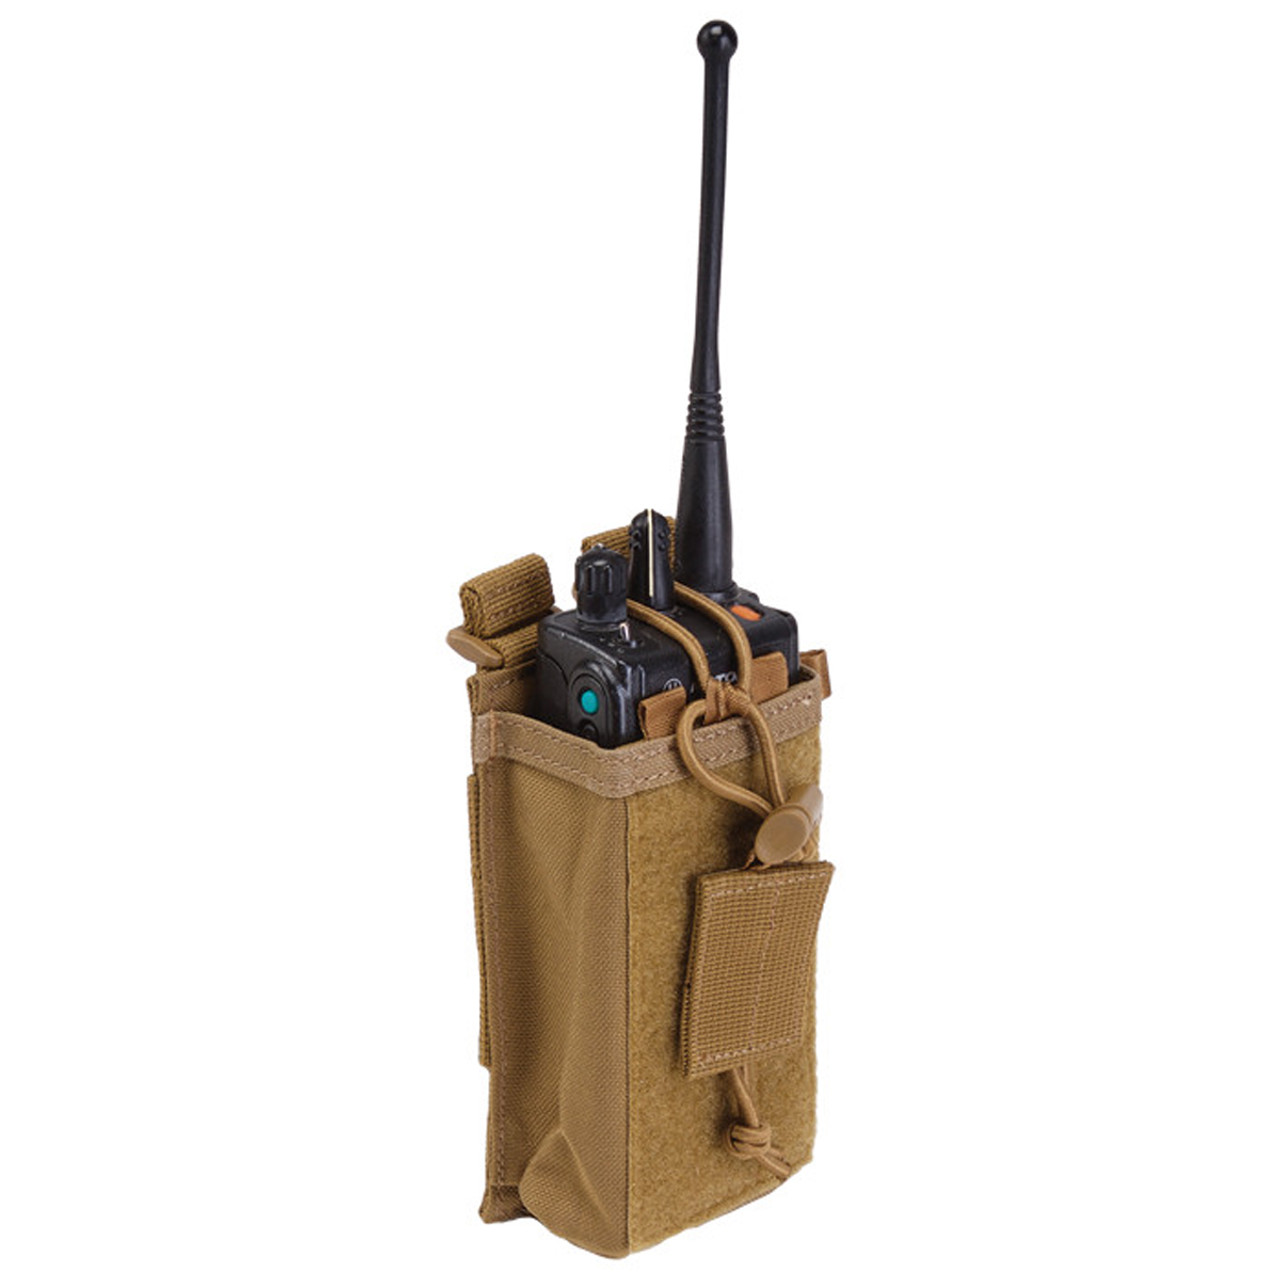 https://cdn11.bigcommerce.com/s-fx5hx6h6ij/images/stencil/1280x1280/products/247/781/511-tactical-radio-pouch-08__79550.1631556628.jpg?c=1